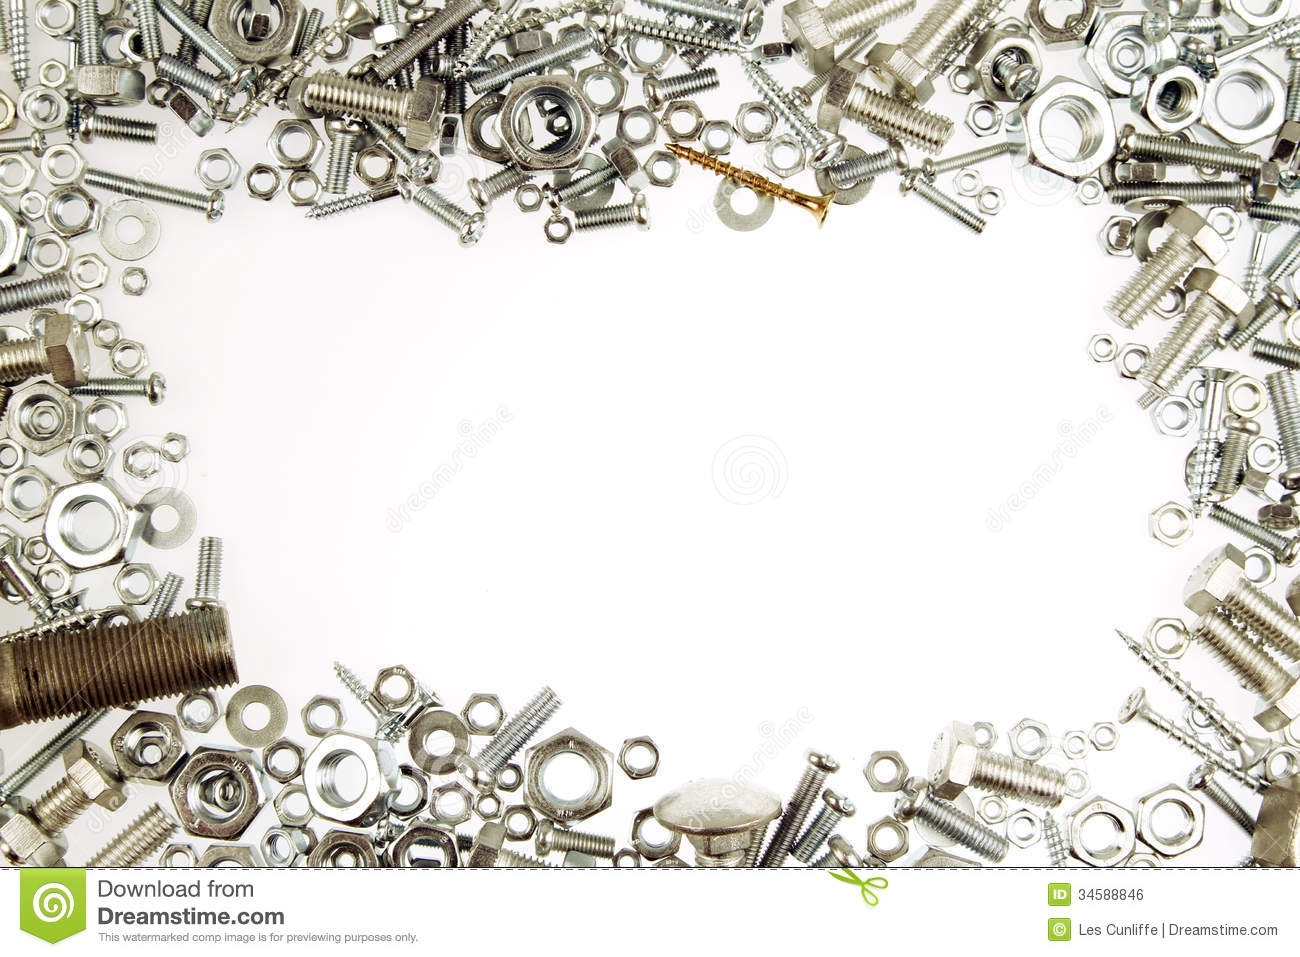 Nuts And Bolts Royalty Free Stock Image   Image  34588846